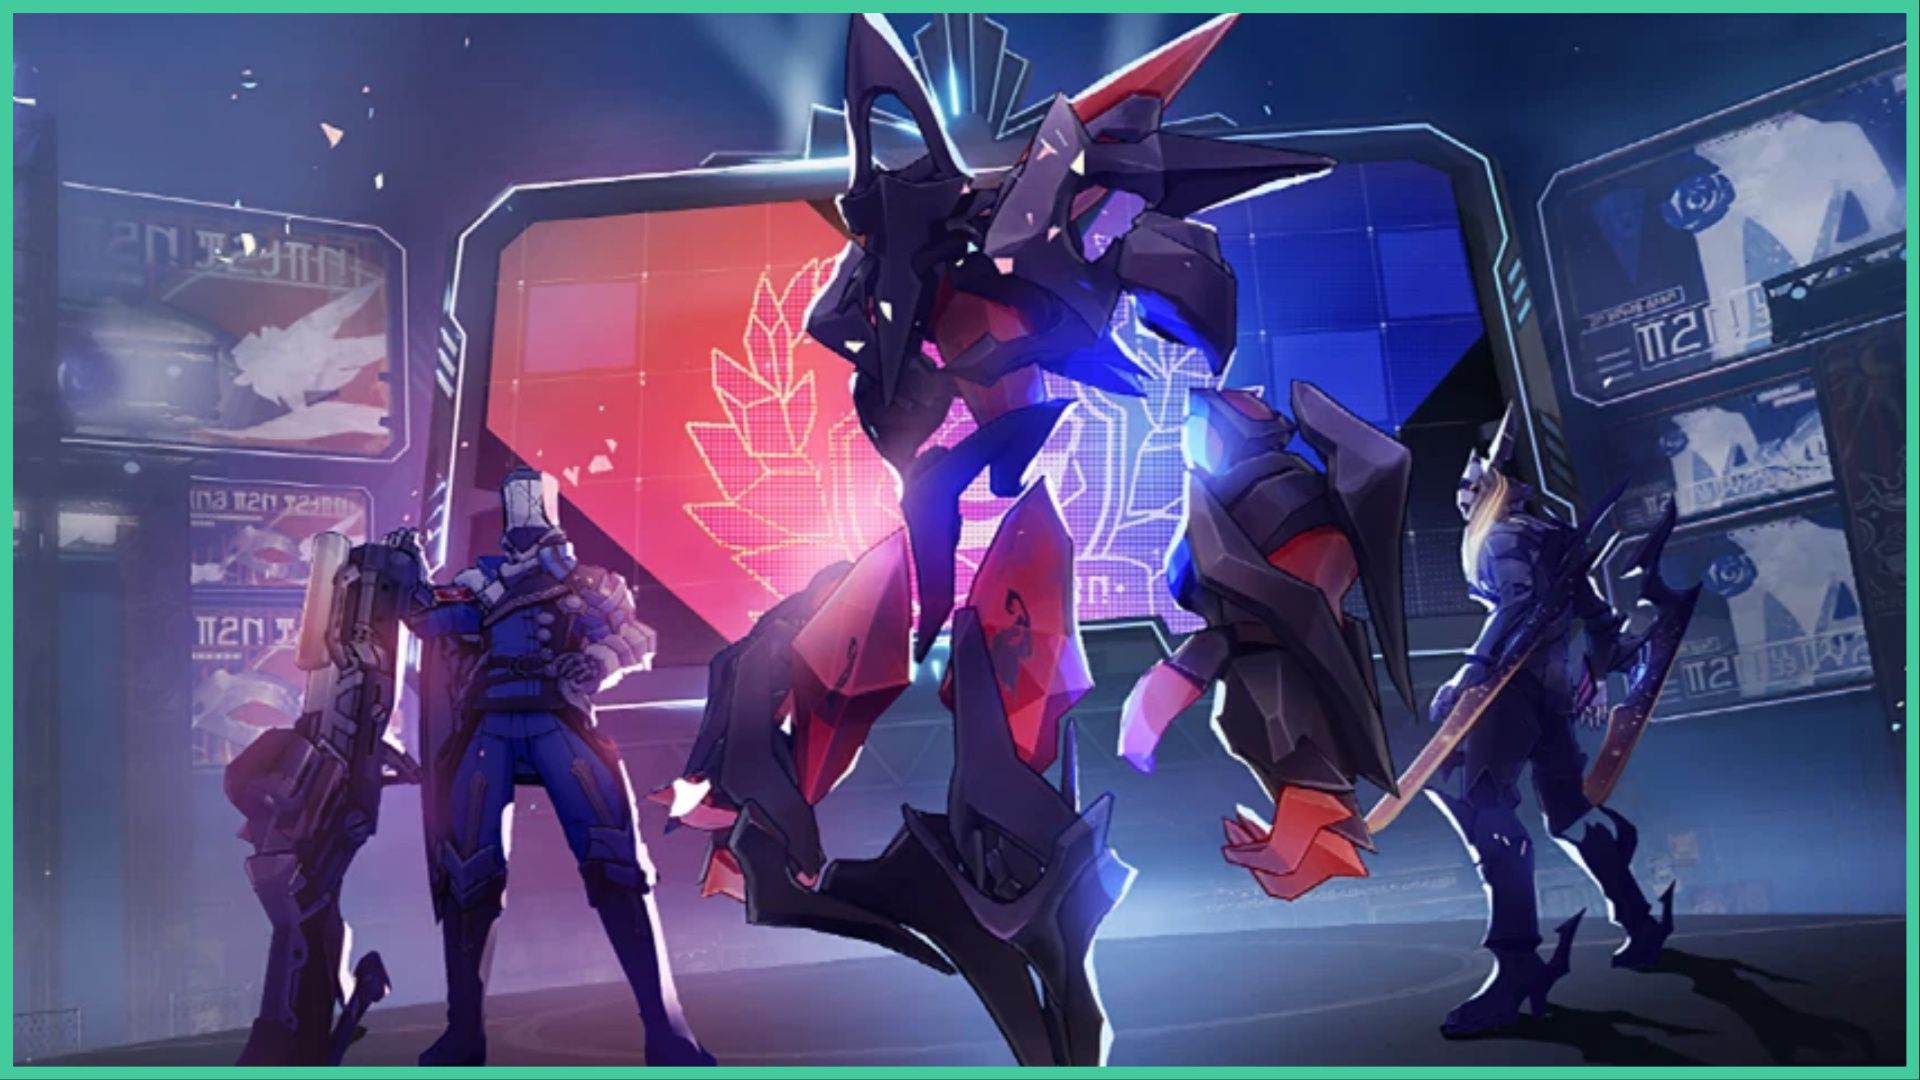 feature image for our aetherium wars tier list, the image features promo art for the honkai star rail event, with three types of enemies from the game standing in front of the event screens with stern poses, spotlights shine behind them on stage